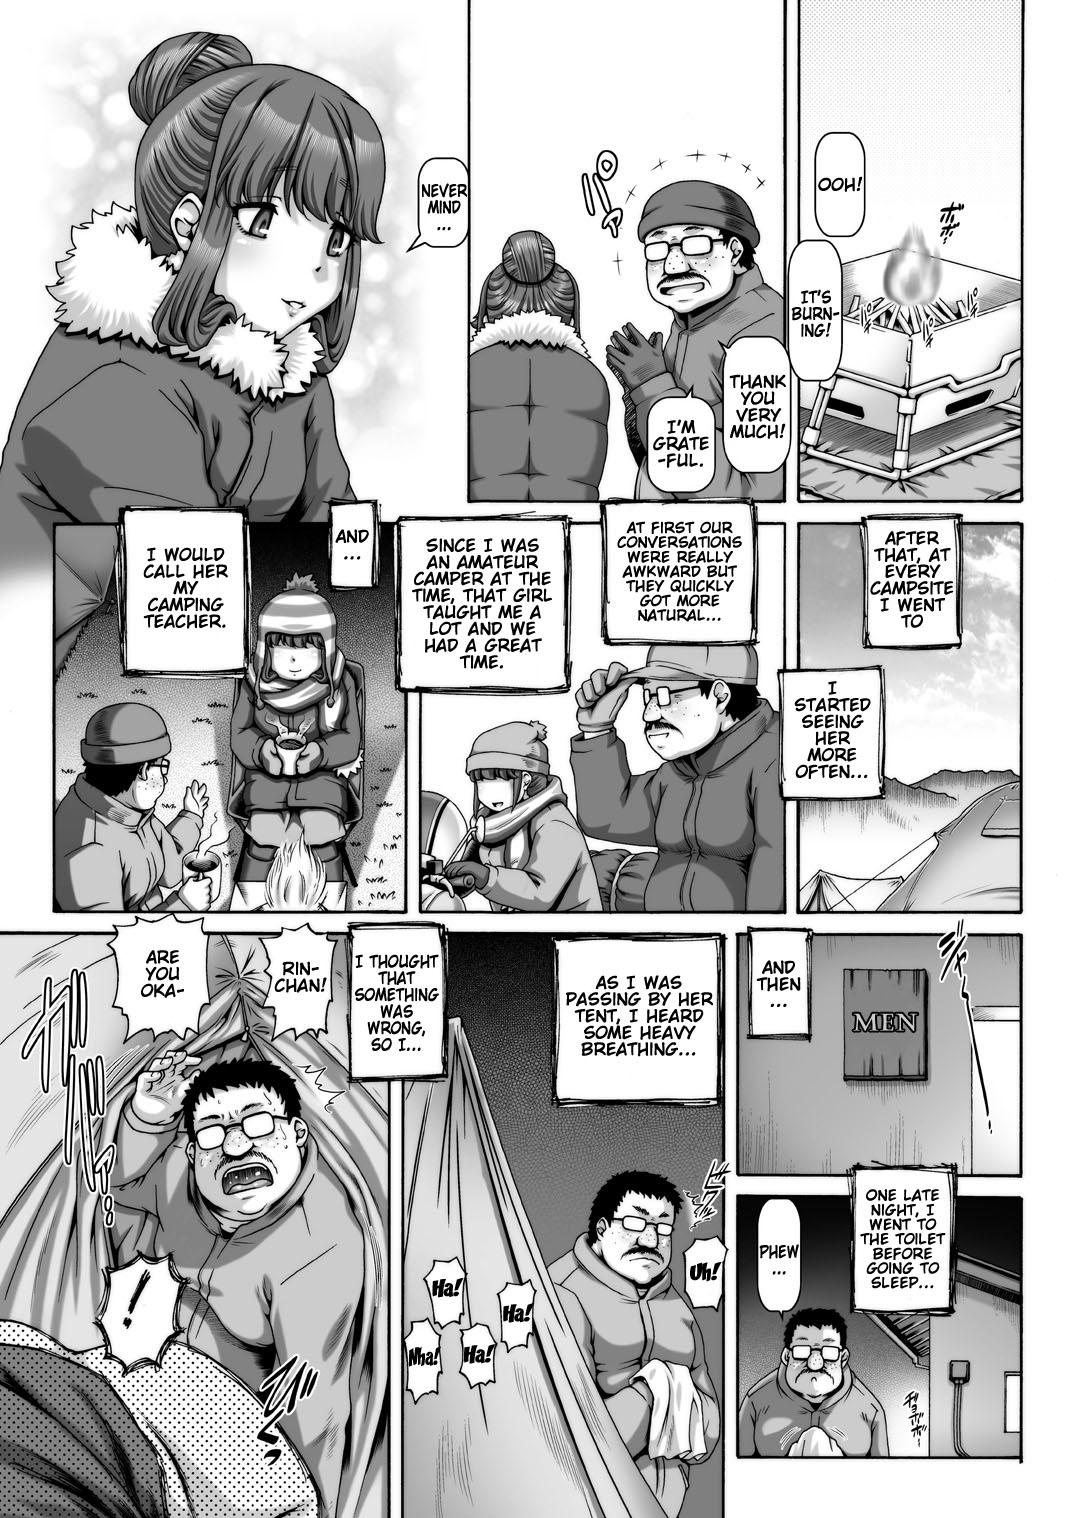 First EMPIRE HARD CORE 2021 SPRING - Yuru camp | laid back camp Lesbos - Page 8